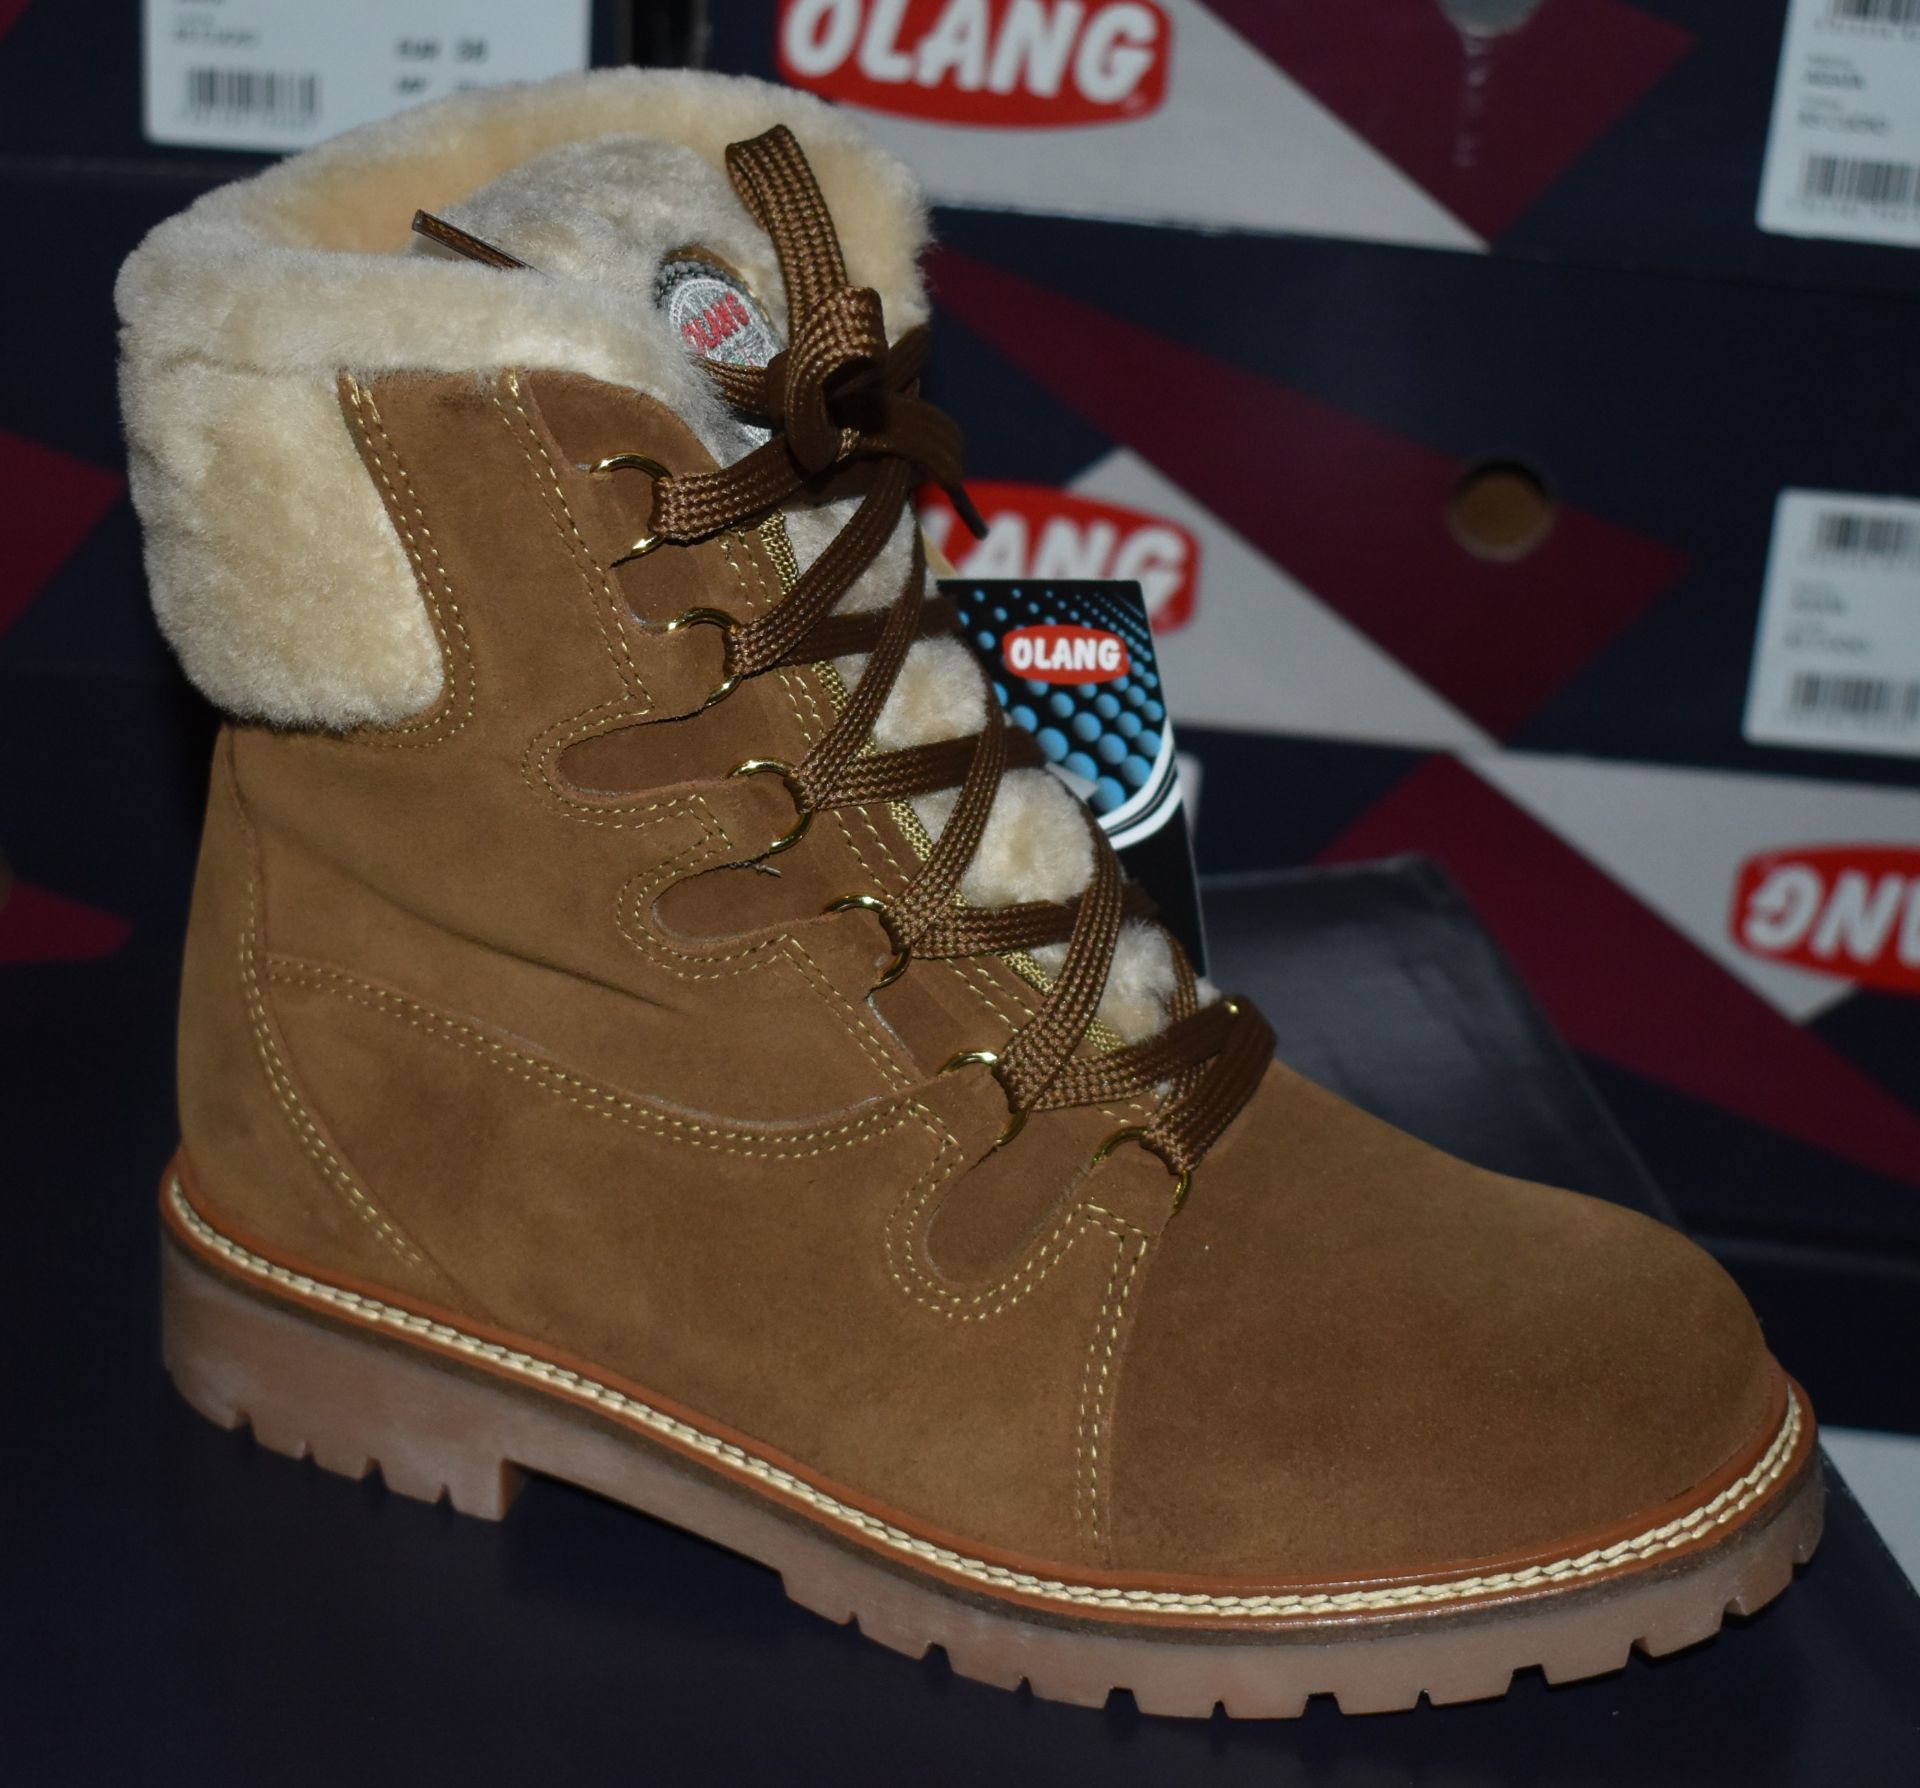 1 x Pair of Designer Olang Meribel 85 CUOIO Women's Winter Boots - Euro Size 40 - Brand New Boxed - Image 7 of 8